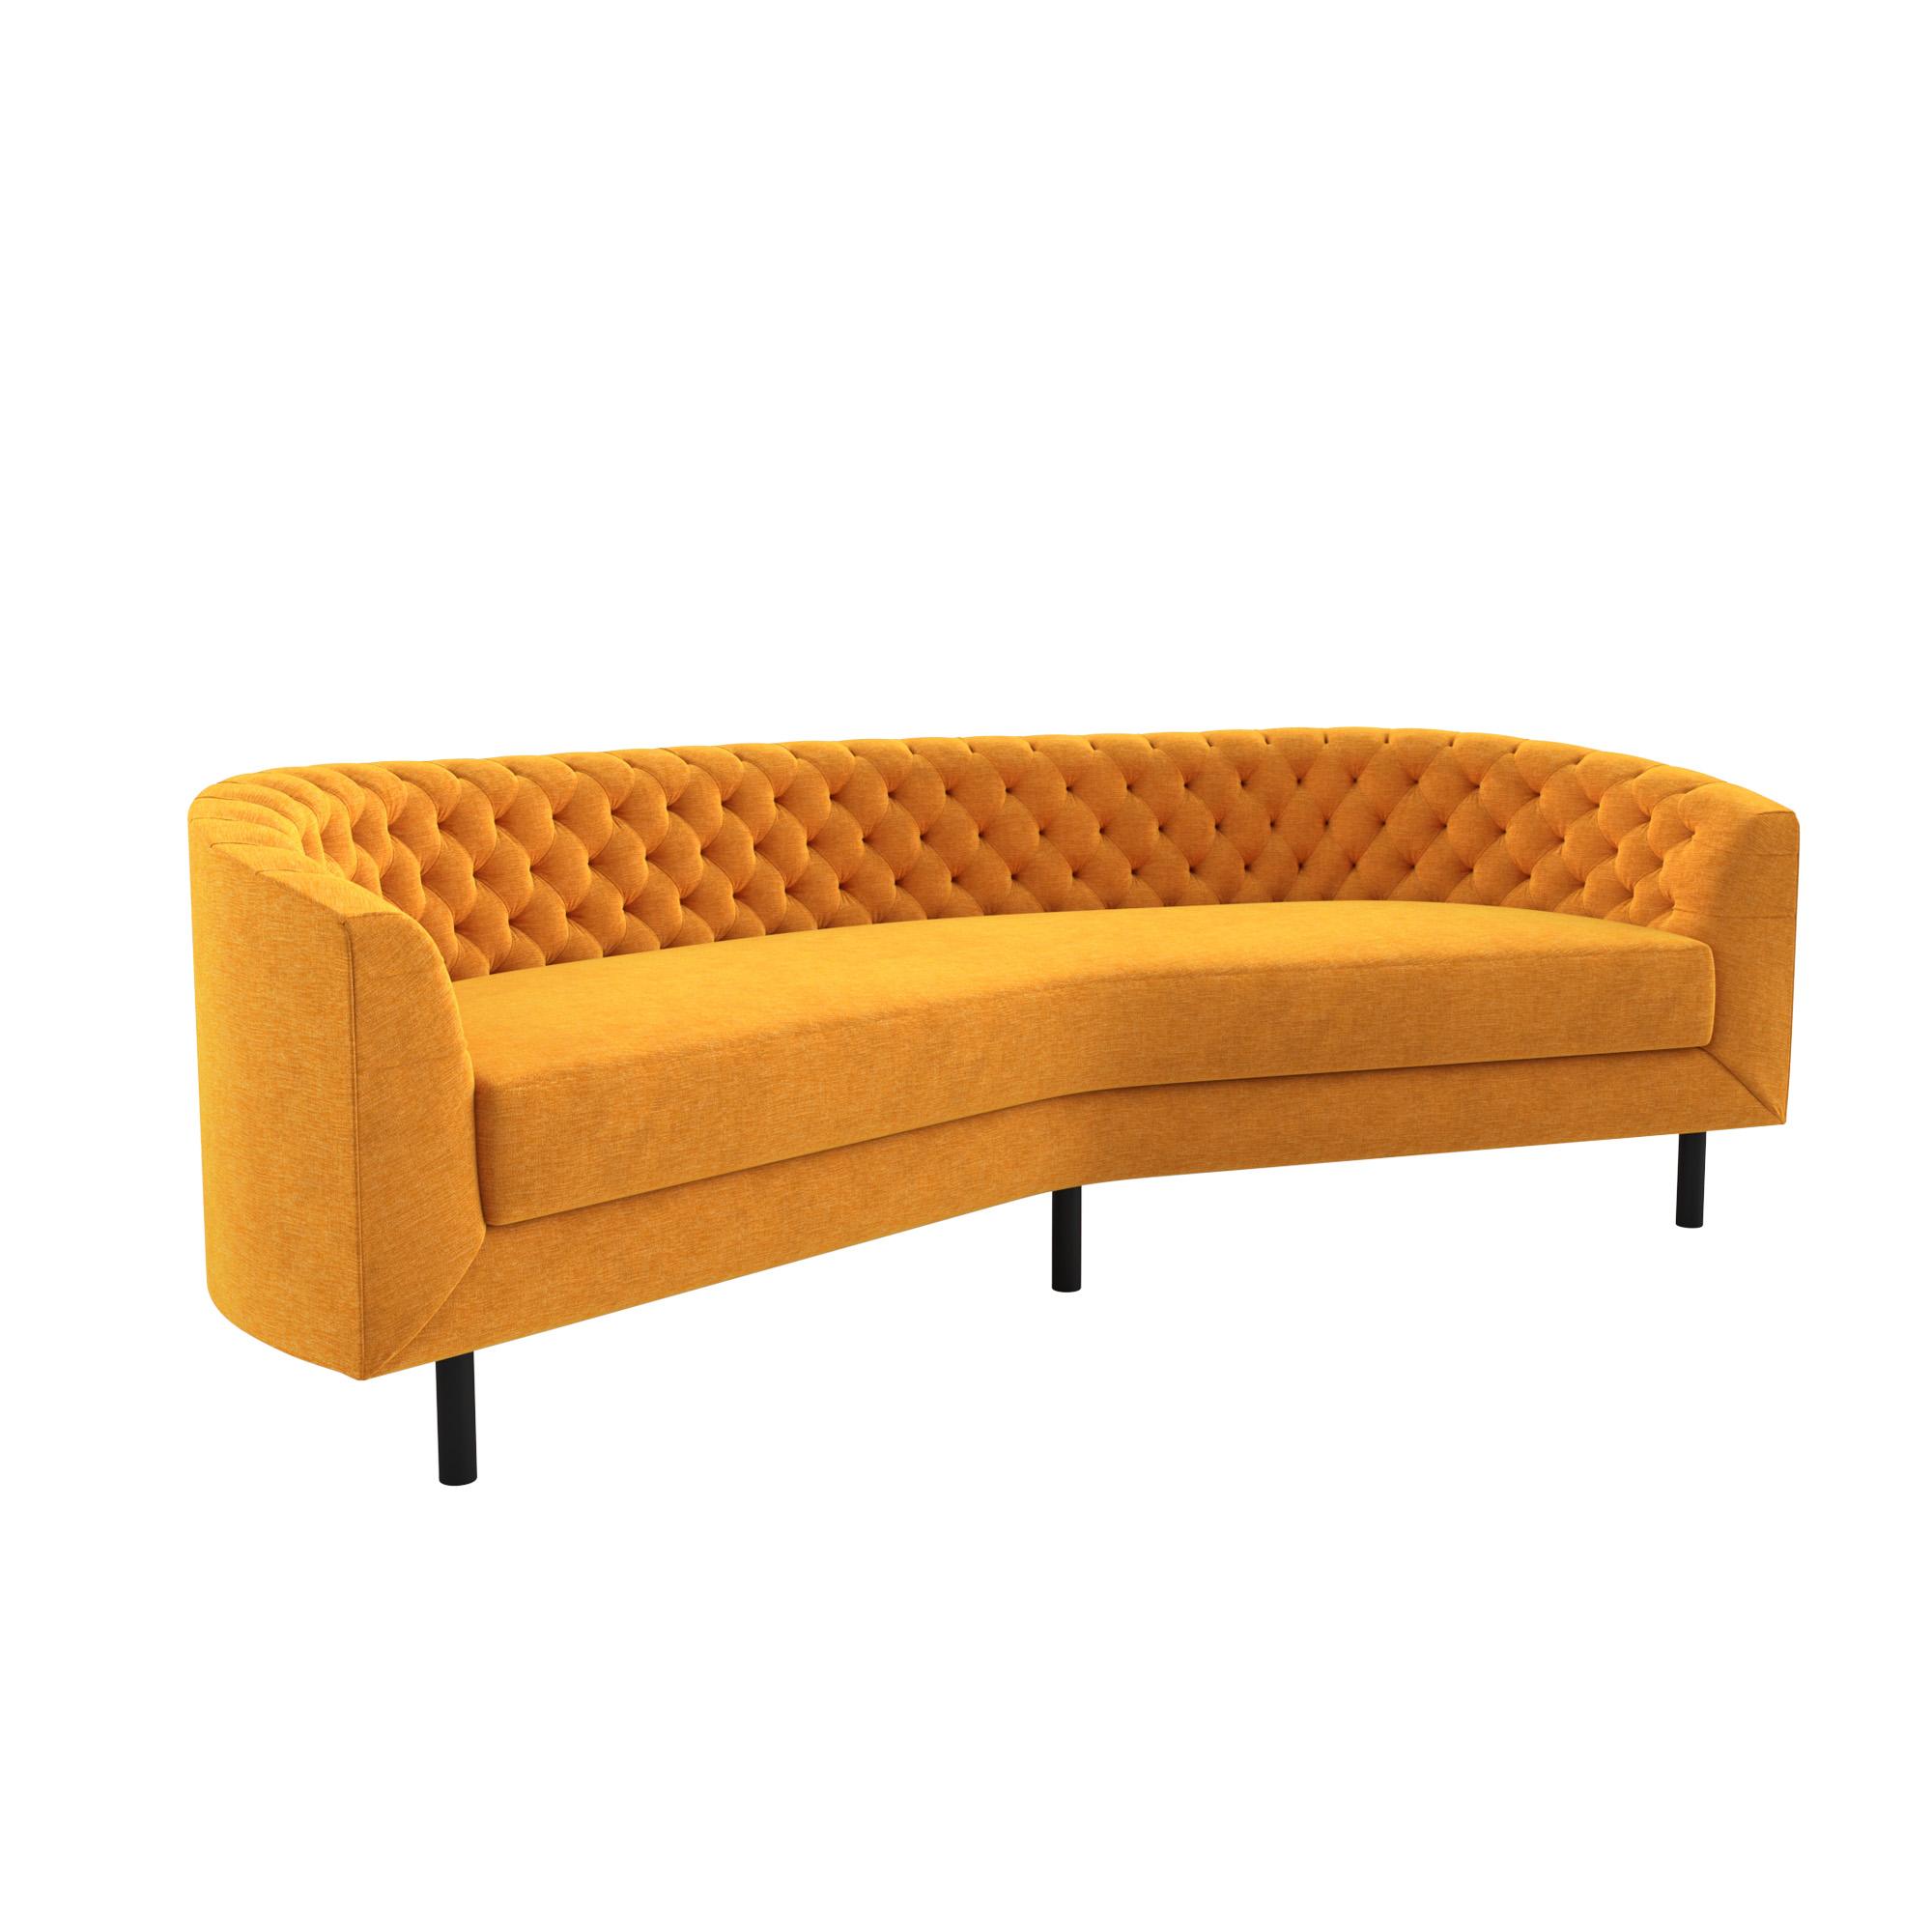 Elinor commercial diamond tufted sofa with metal legs